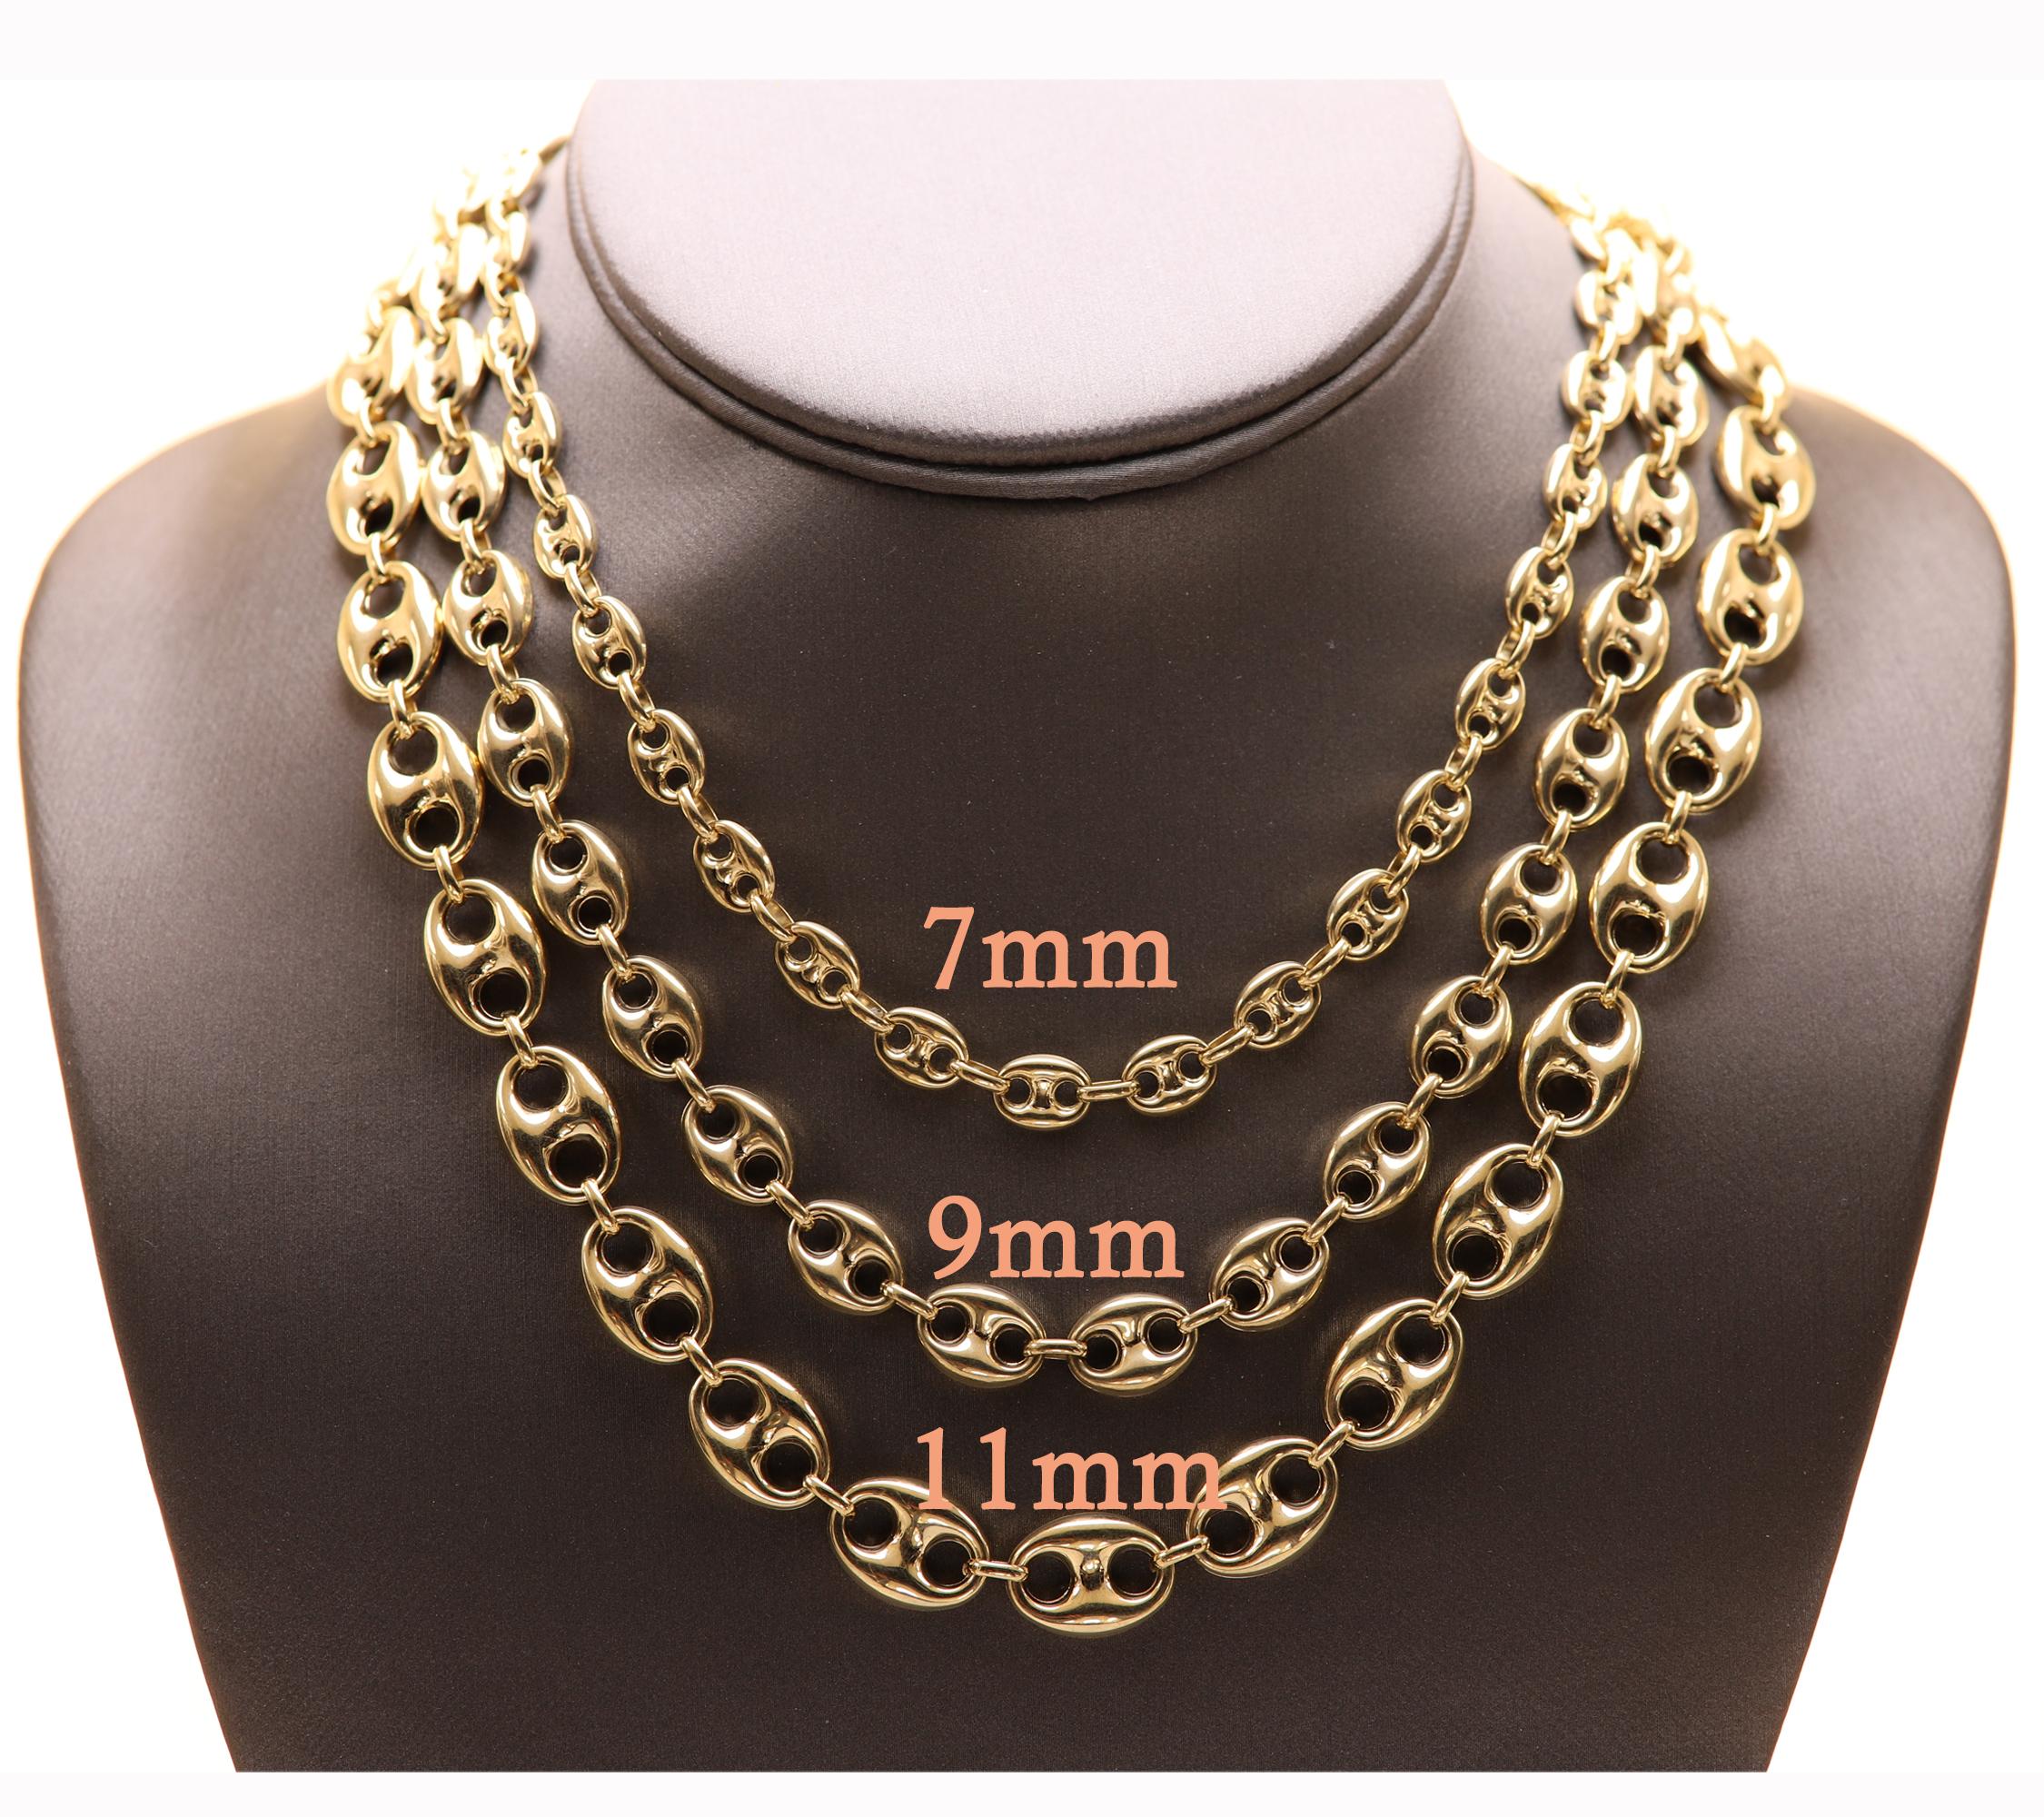 Puffed Anchor Italian Gold Necklace Chain Mariner Link Chain Solid 14 Karat Gold 8